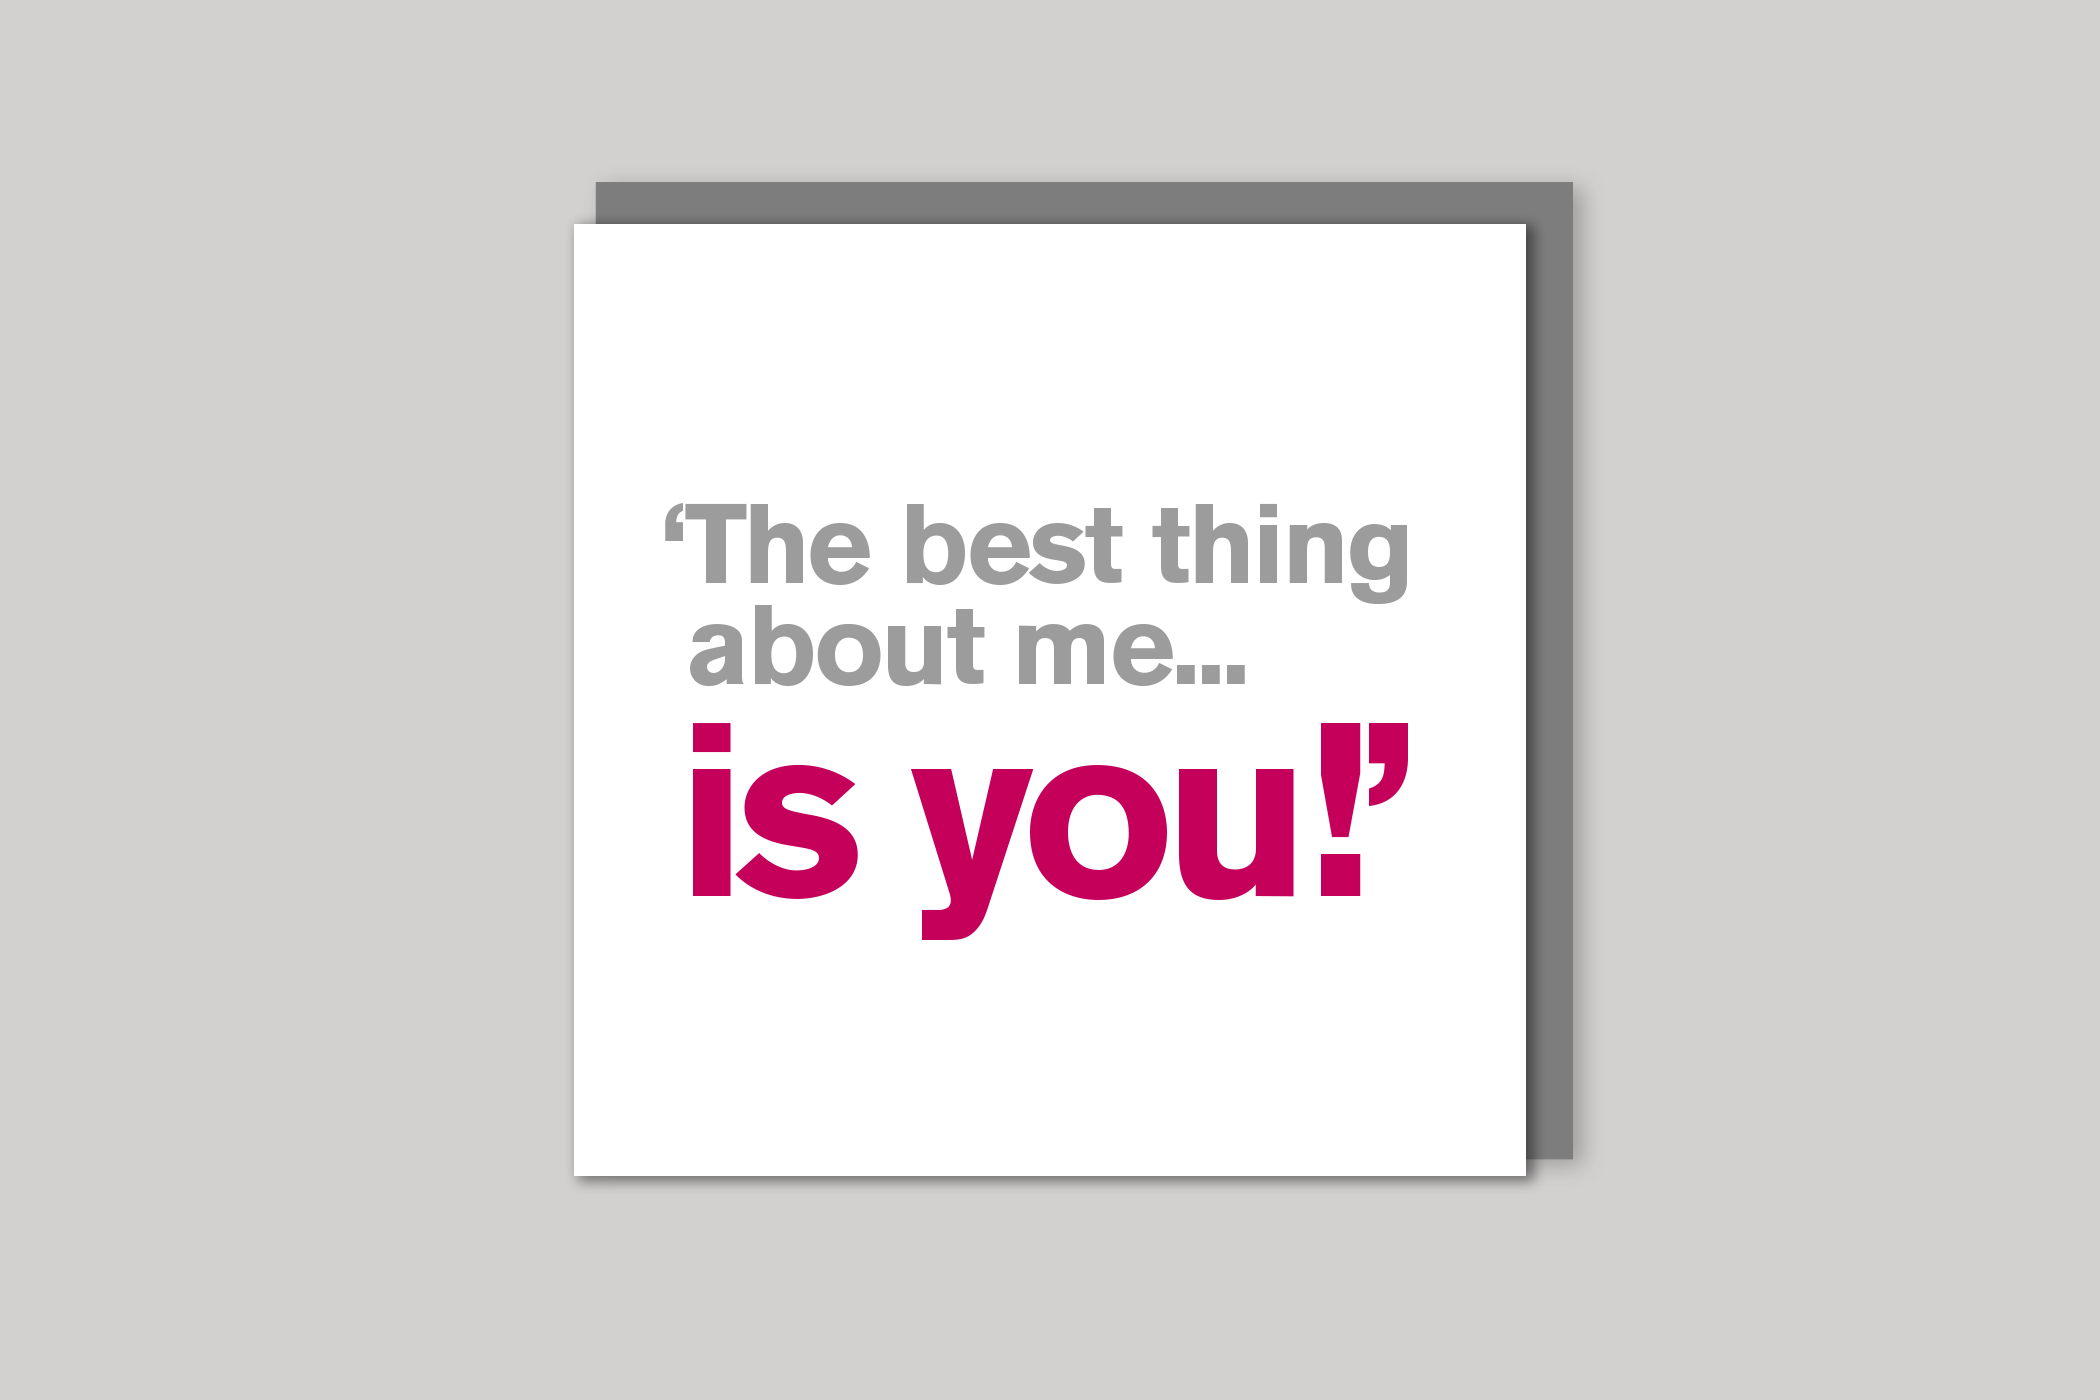 The Best Thing About Me from Lyric range of quotation cards by Icon, back page.